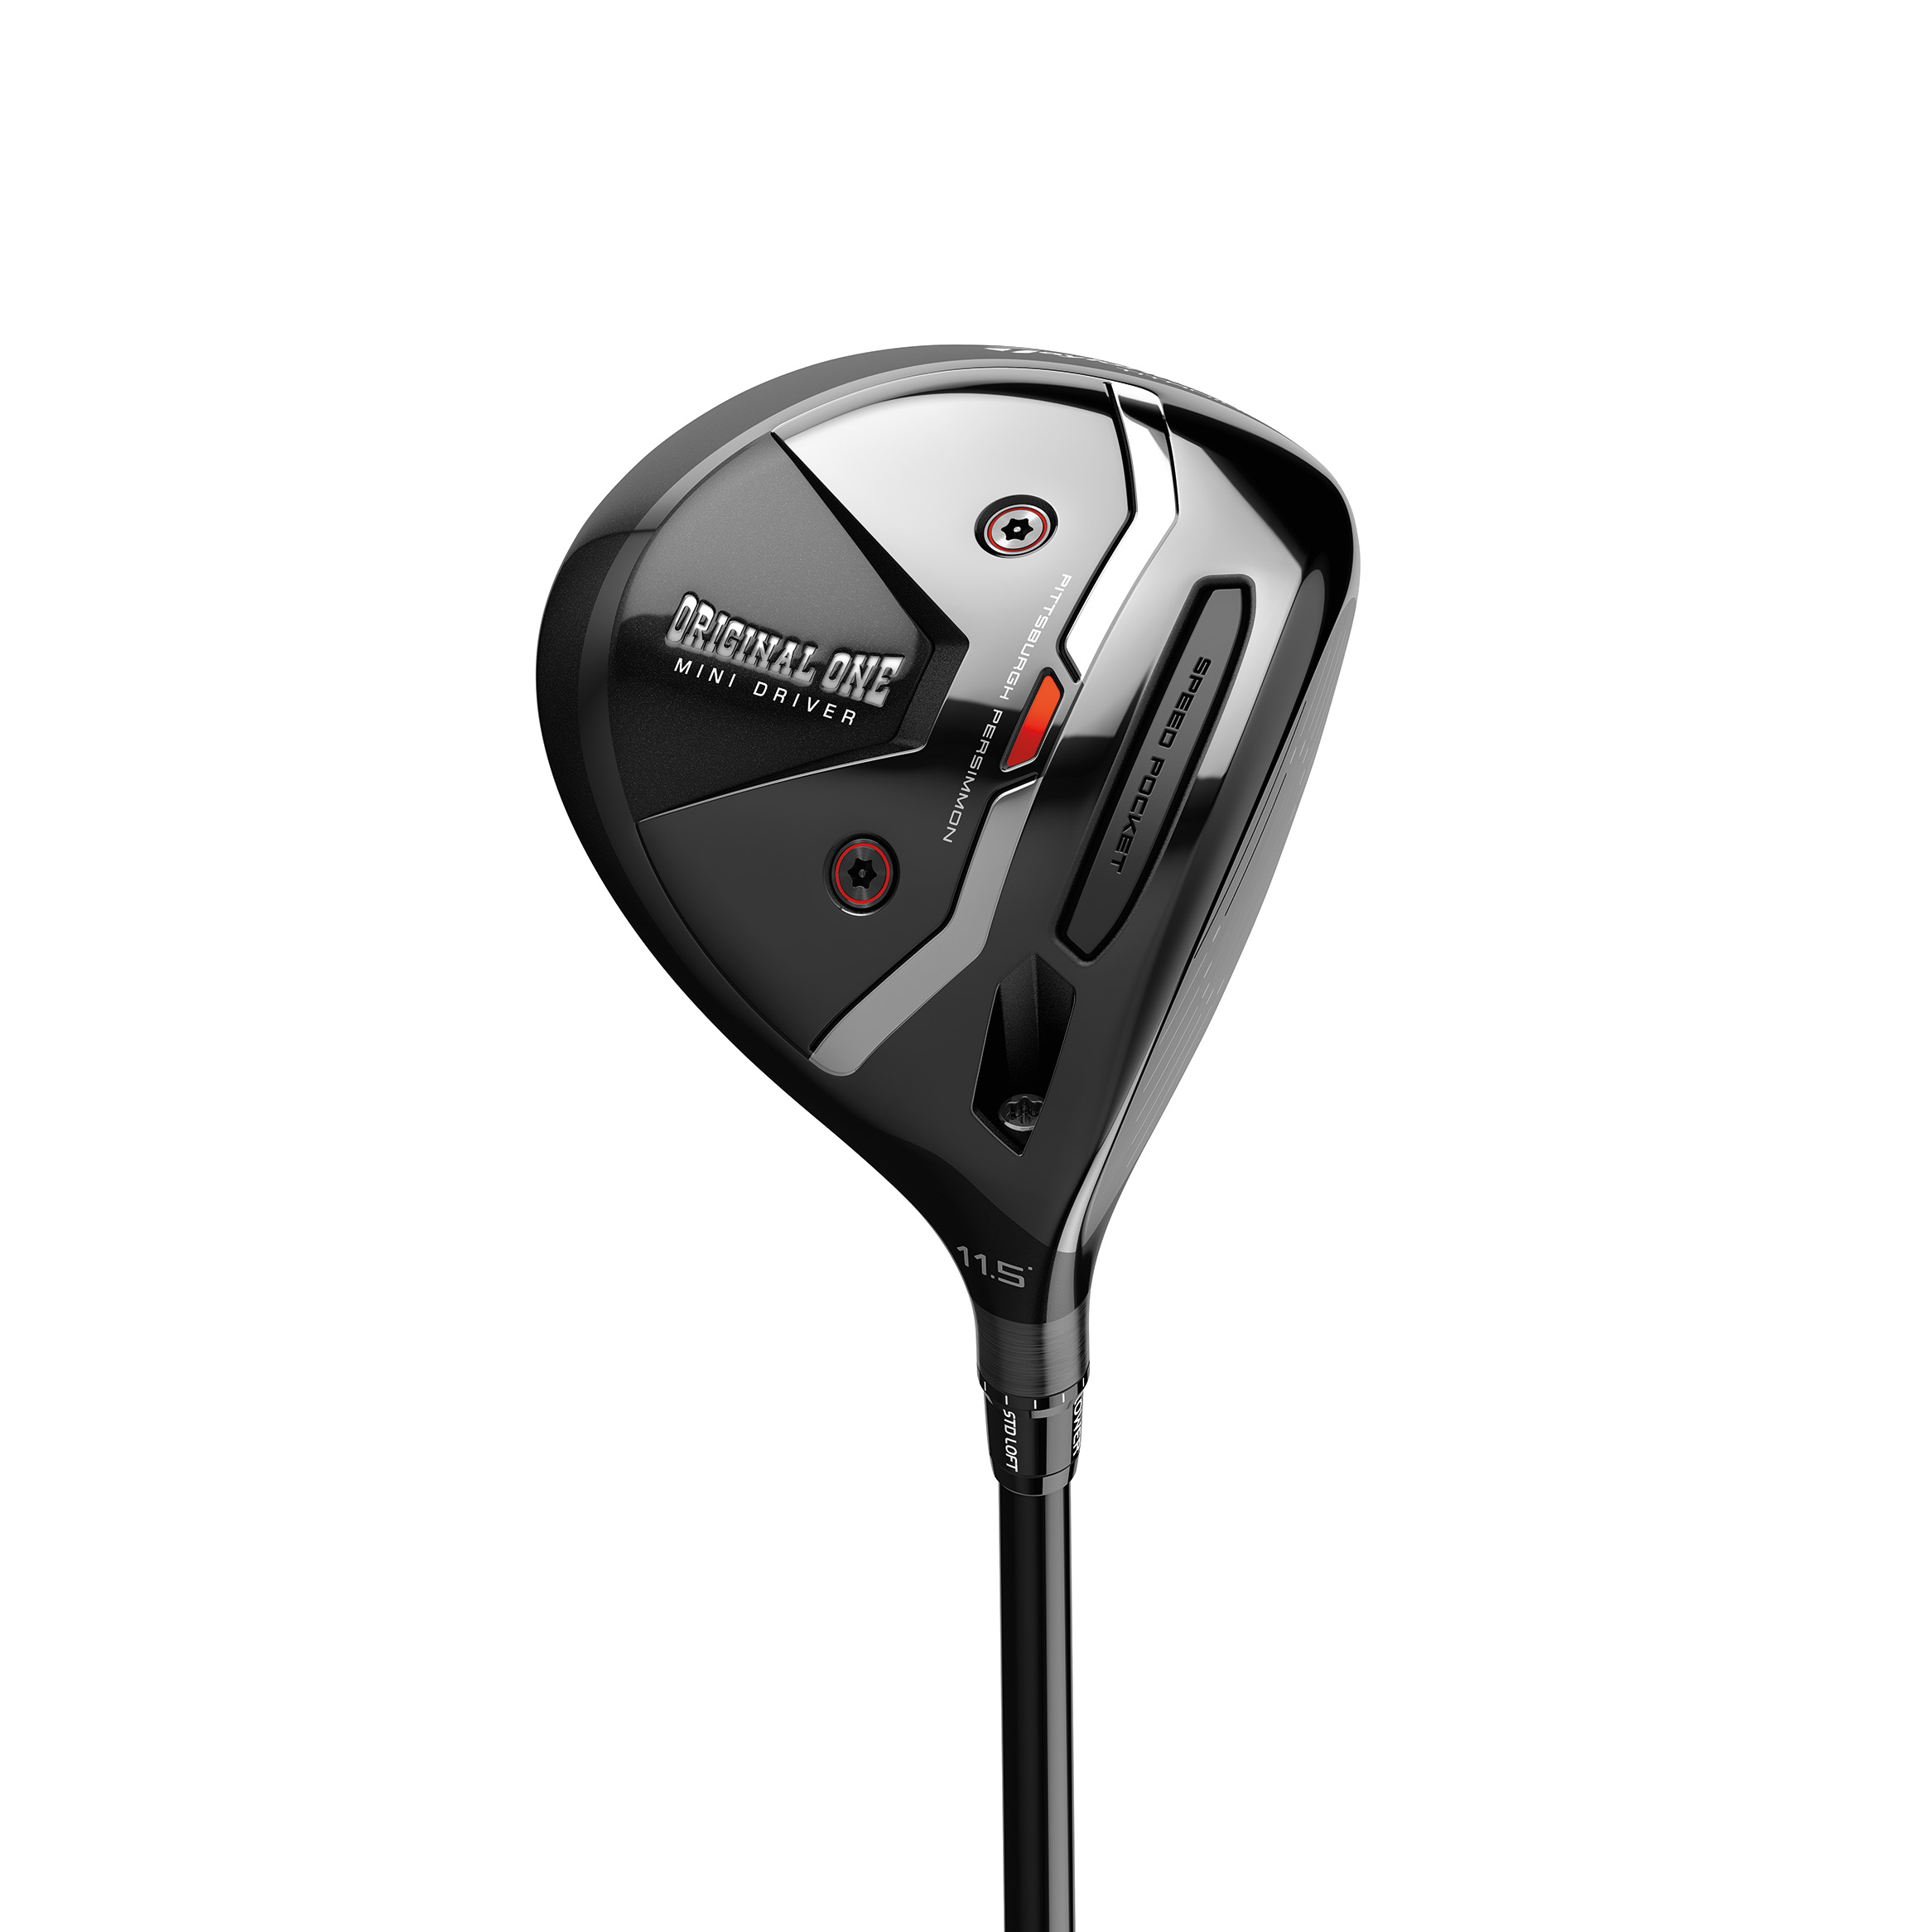 taylormade 300 mini driver review